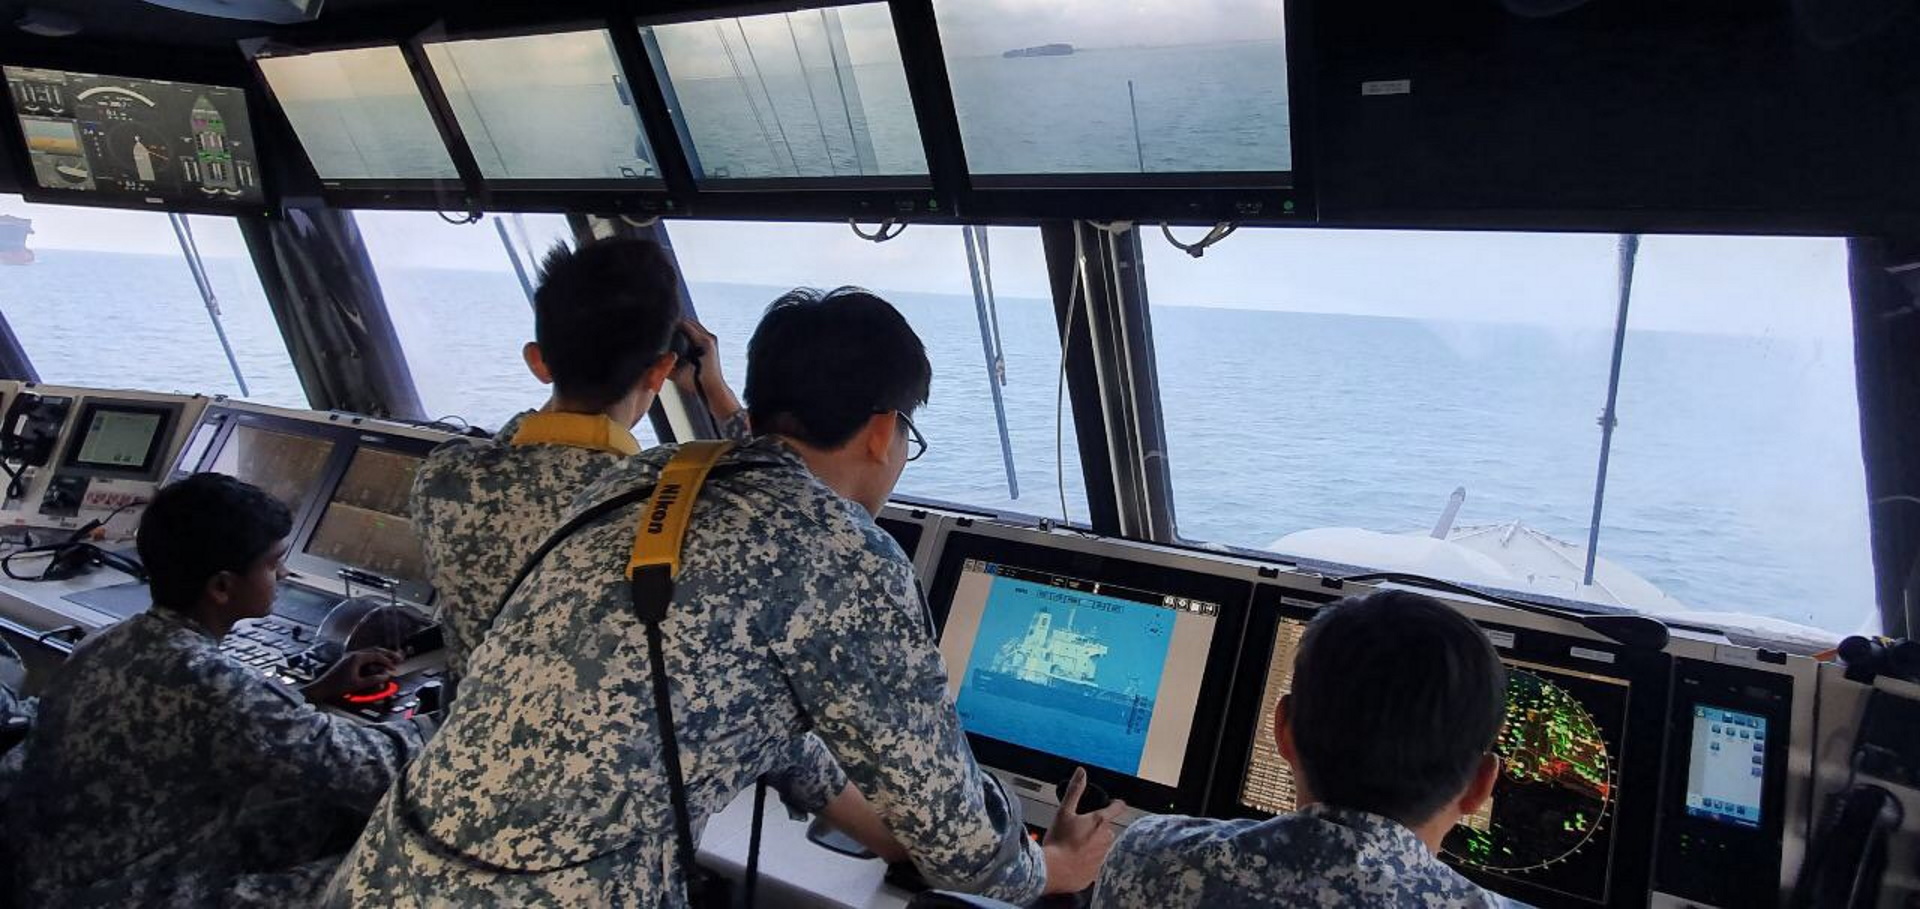 RSN personnel on board RSS Independence, monitoring the Sam Jaguar this morning.